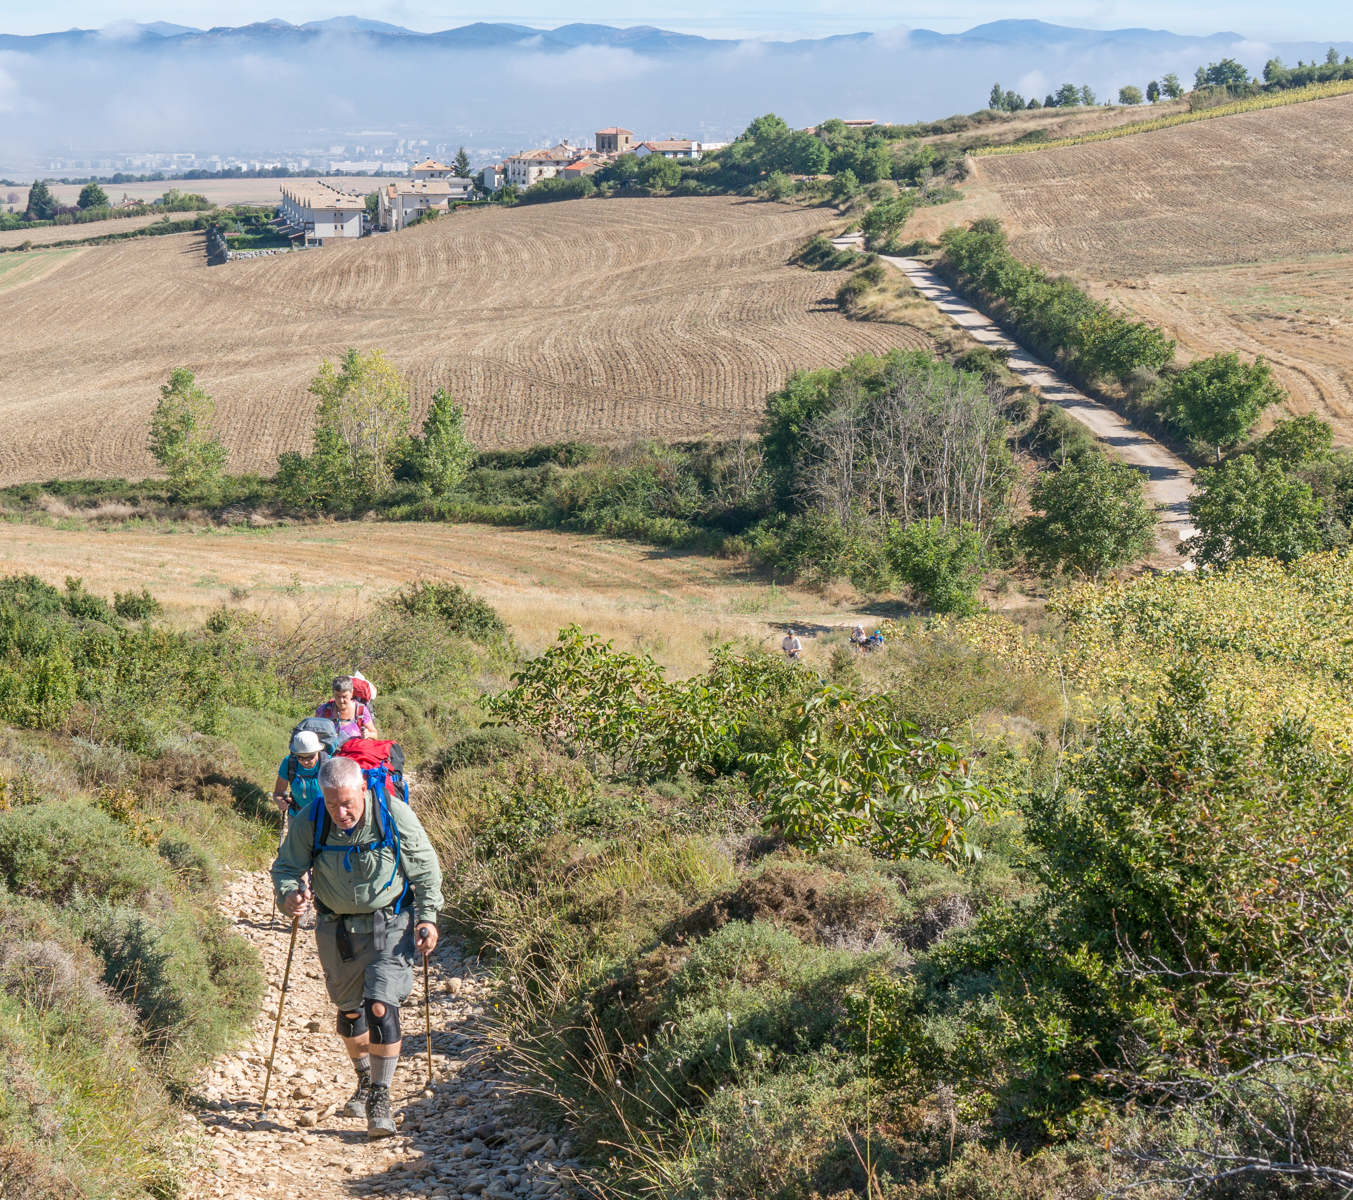 Camino pilgrims ascend Alto del Perdón mountain range (Mountains of Forgiveness) west of Pamplona, Spain | Photo by Mike Hudak